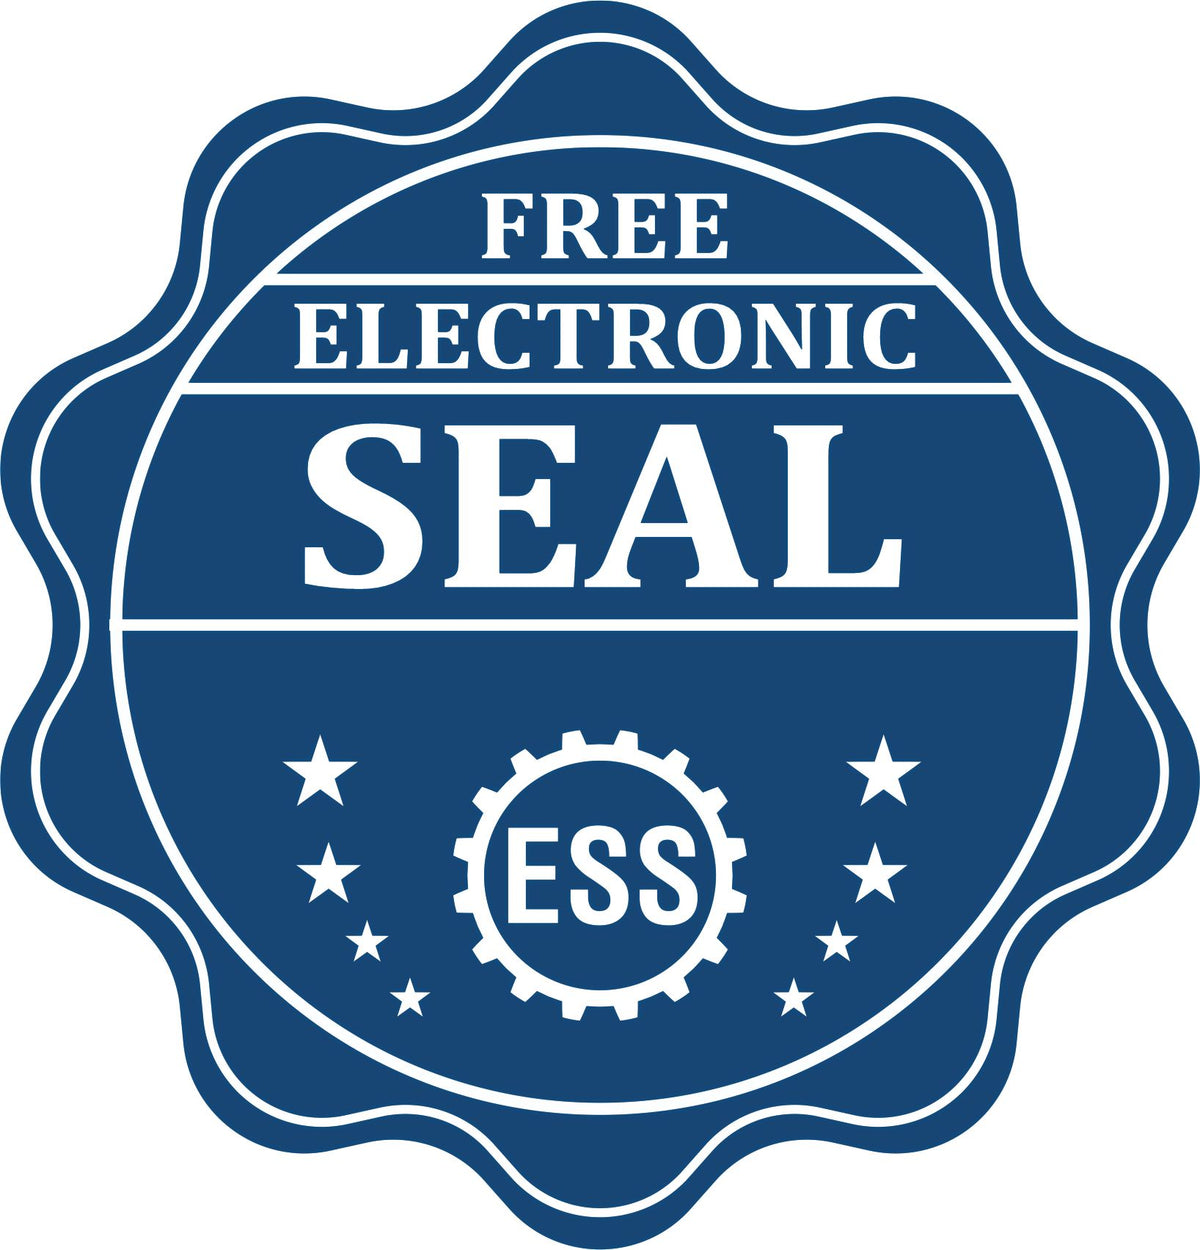 A badge showing a free electronic seal for the Gift Pennsylvania Engineer Seal with stars and the ESS gear on the emblem.